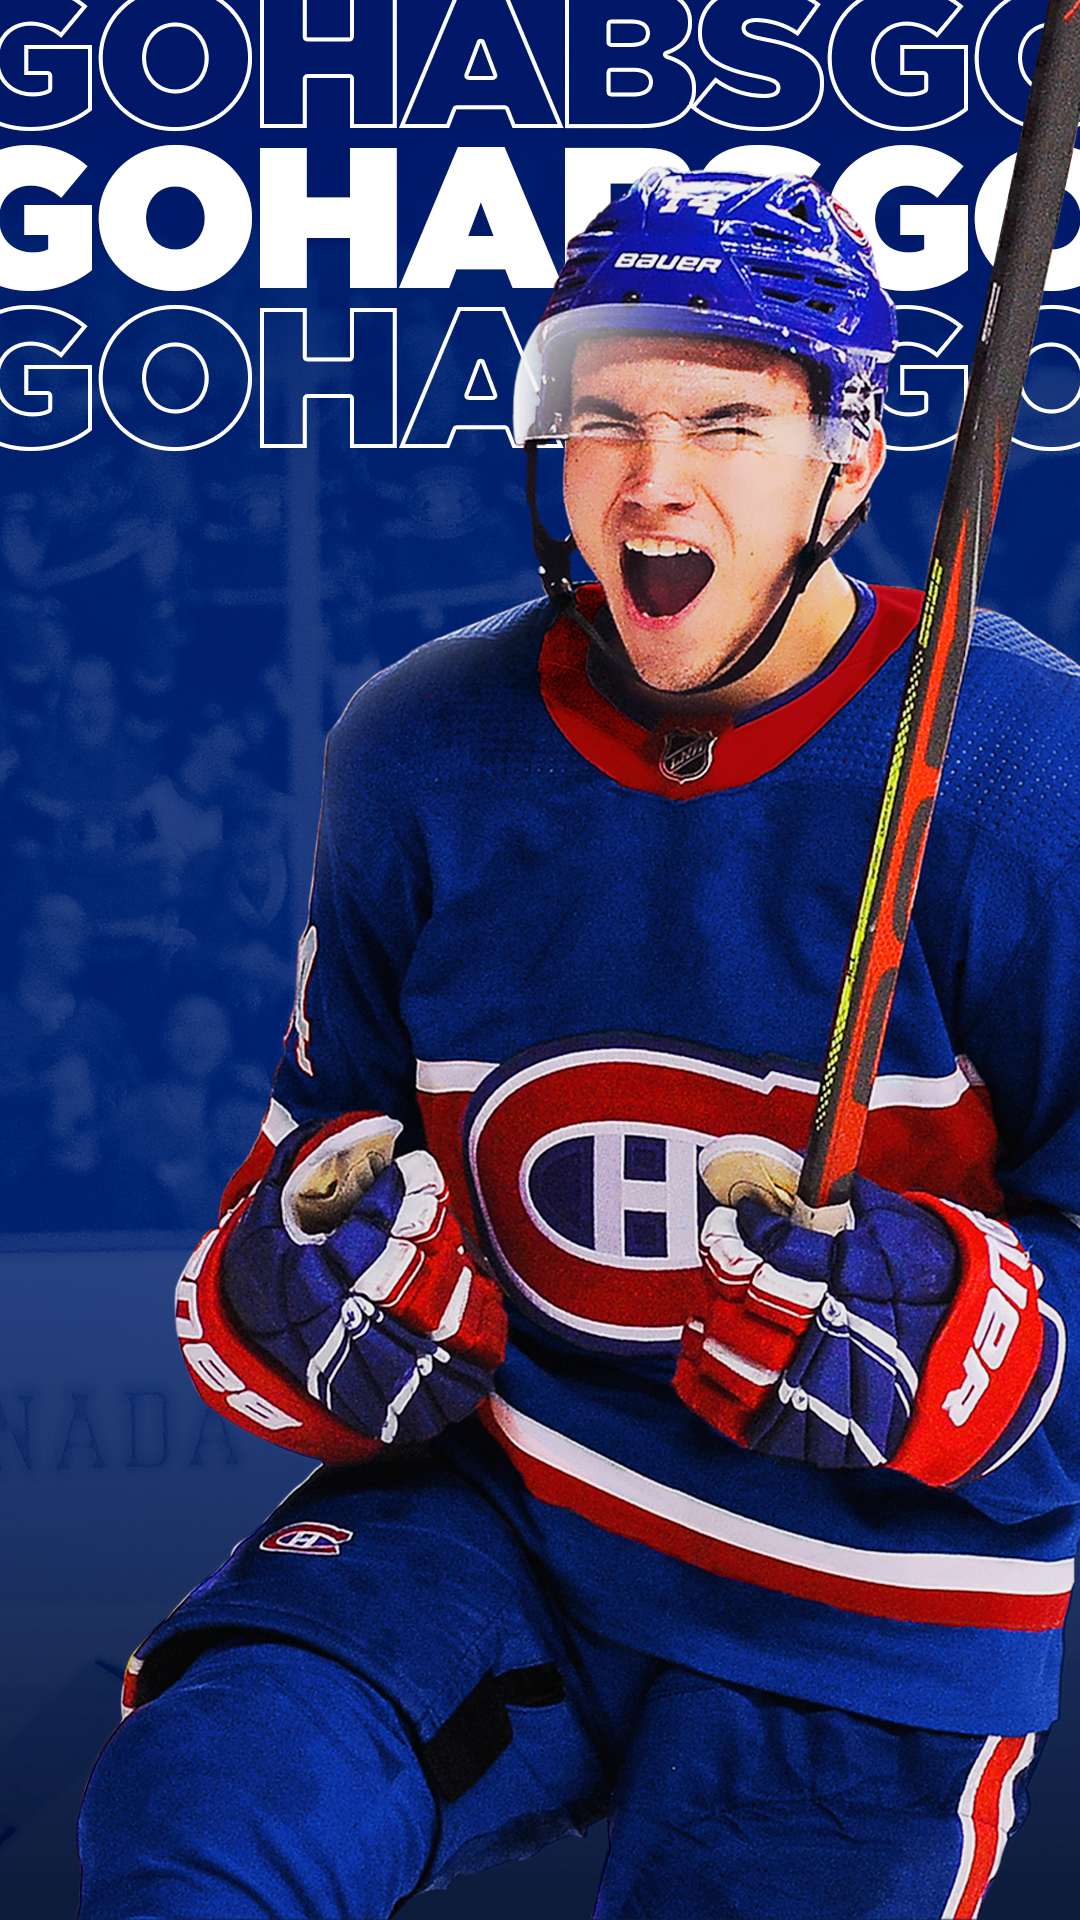 Montreal Canadians Wallpapers